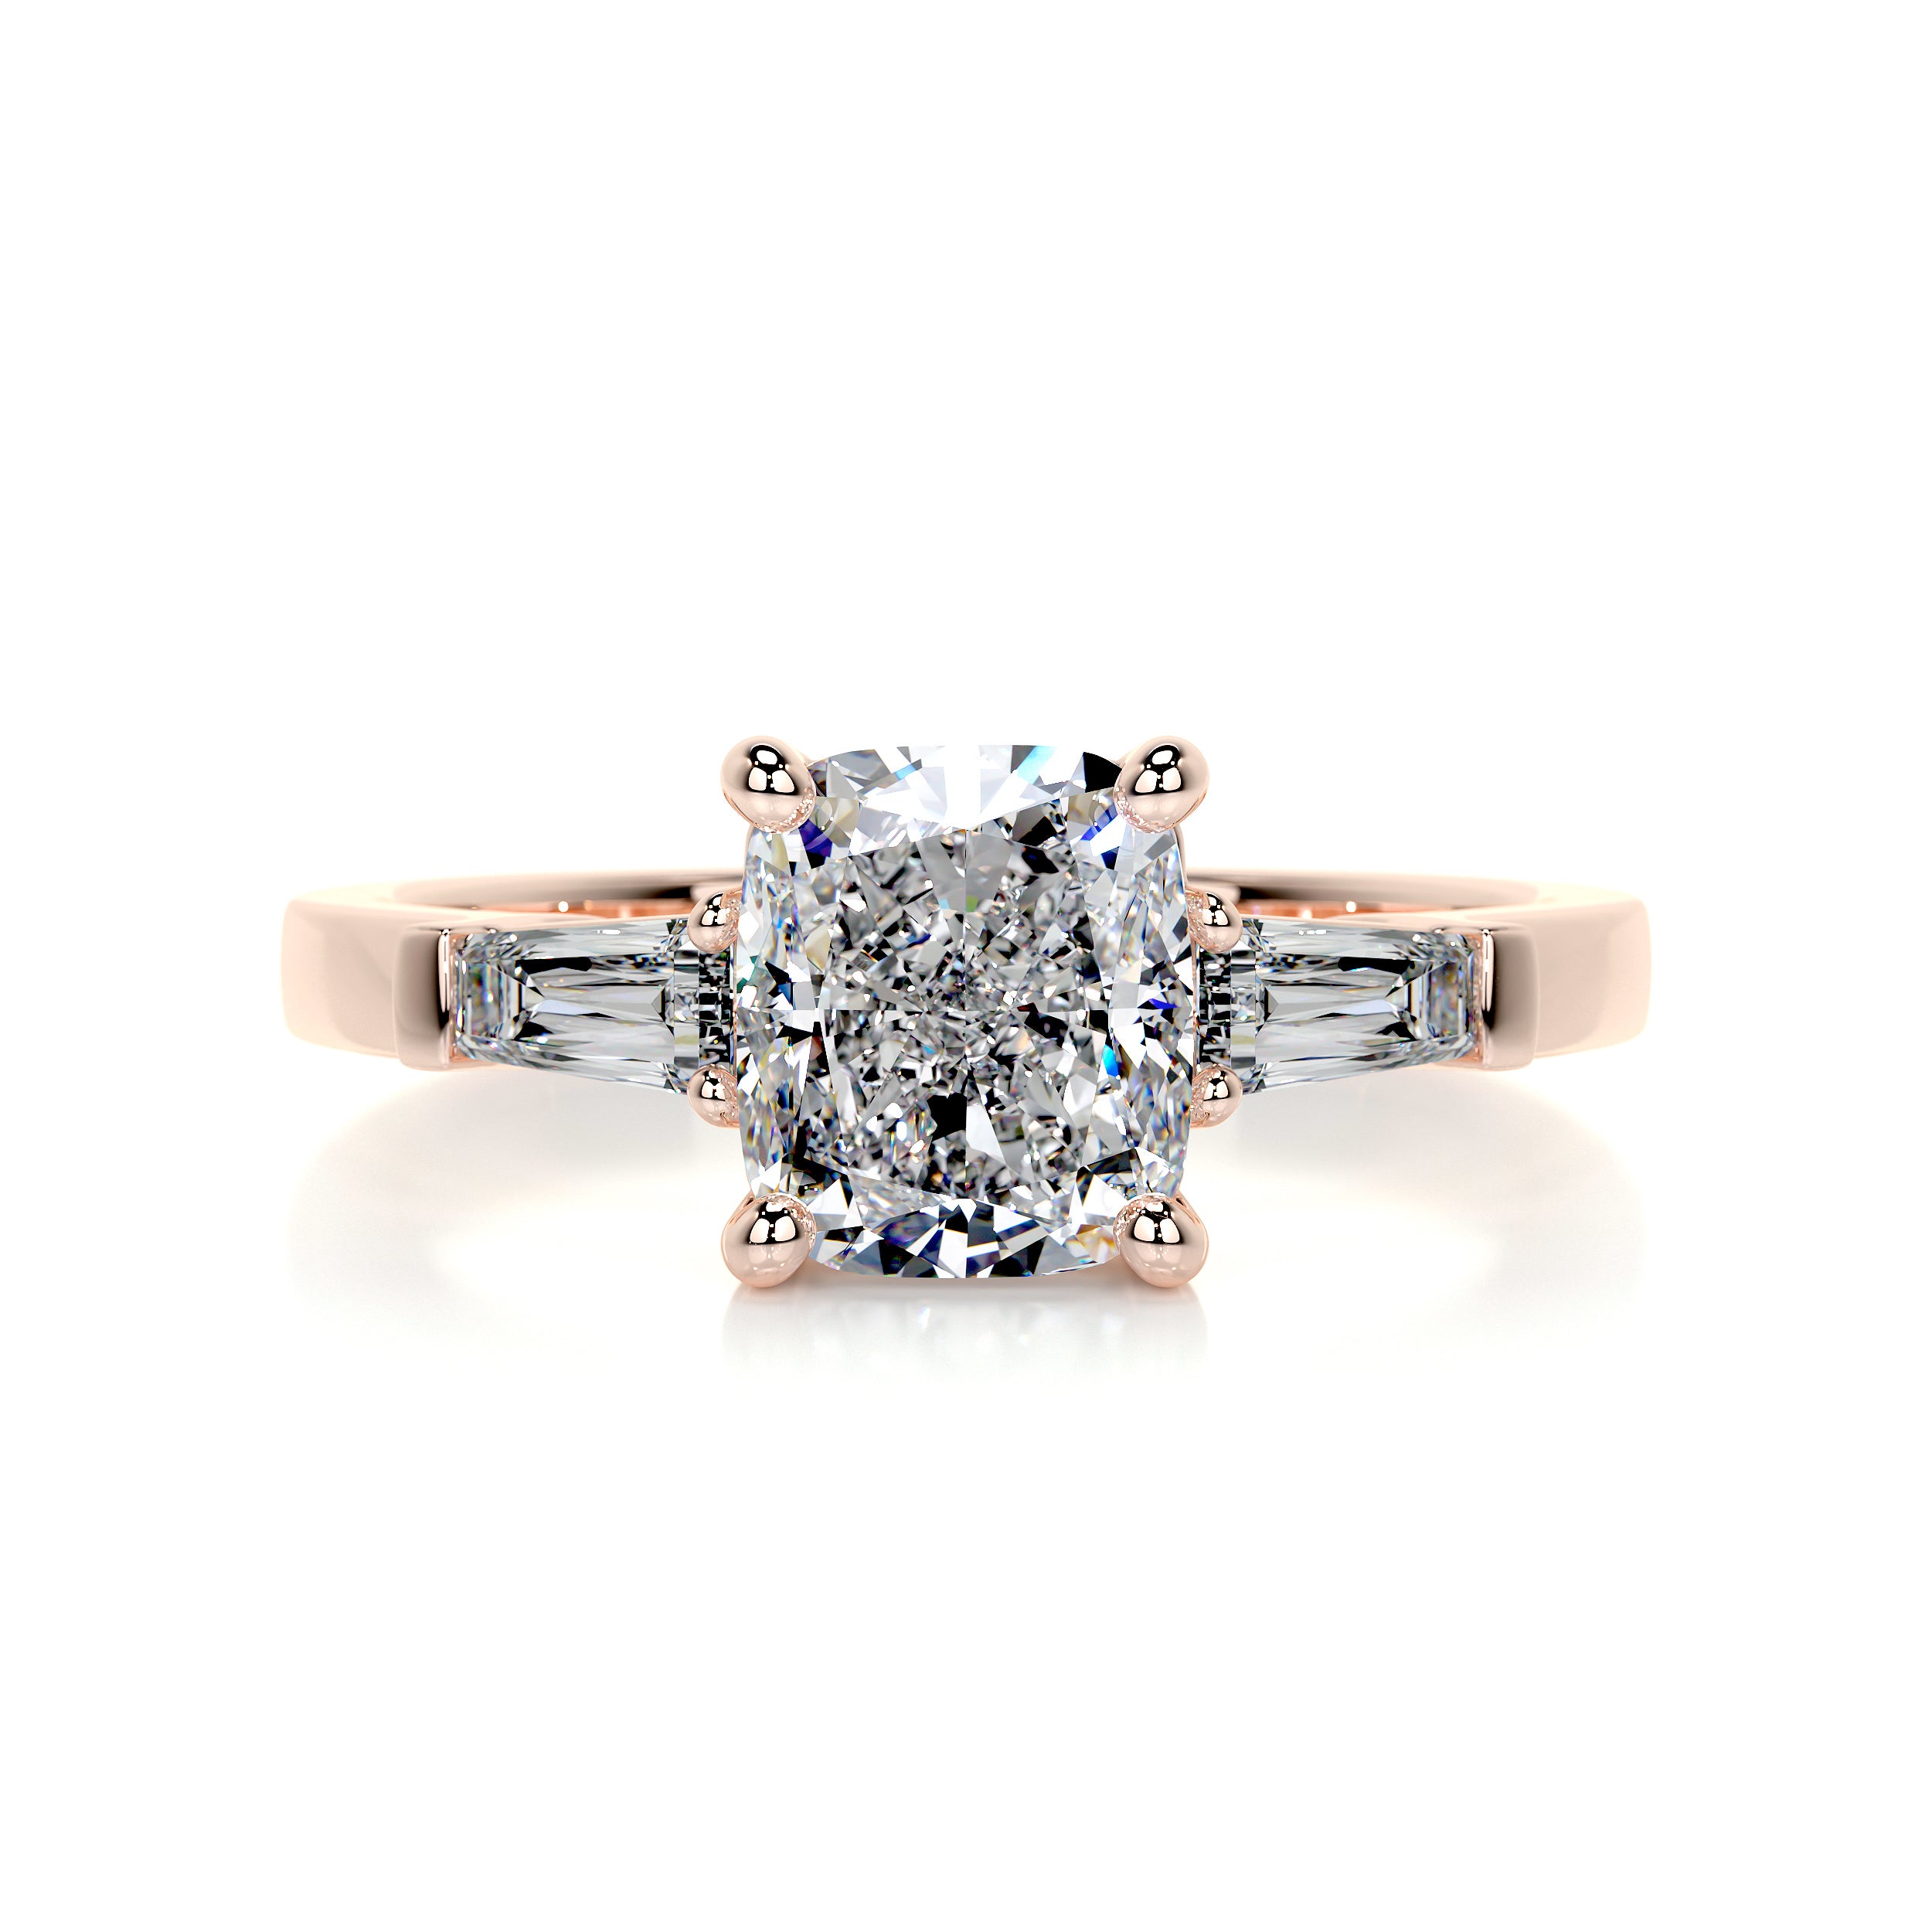 Vintage Wedding Rings: 53 Ideas We're Obsessed With